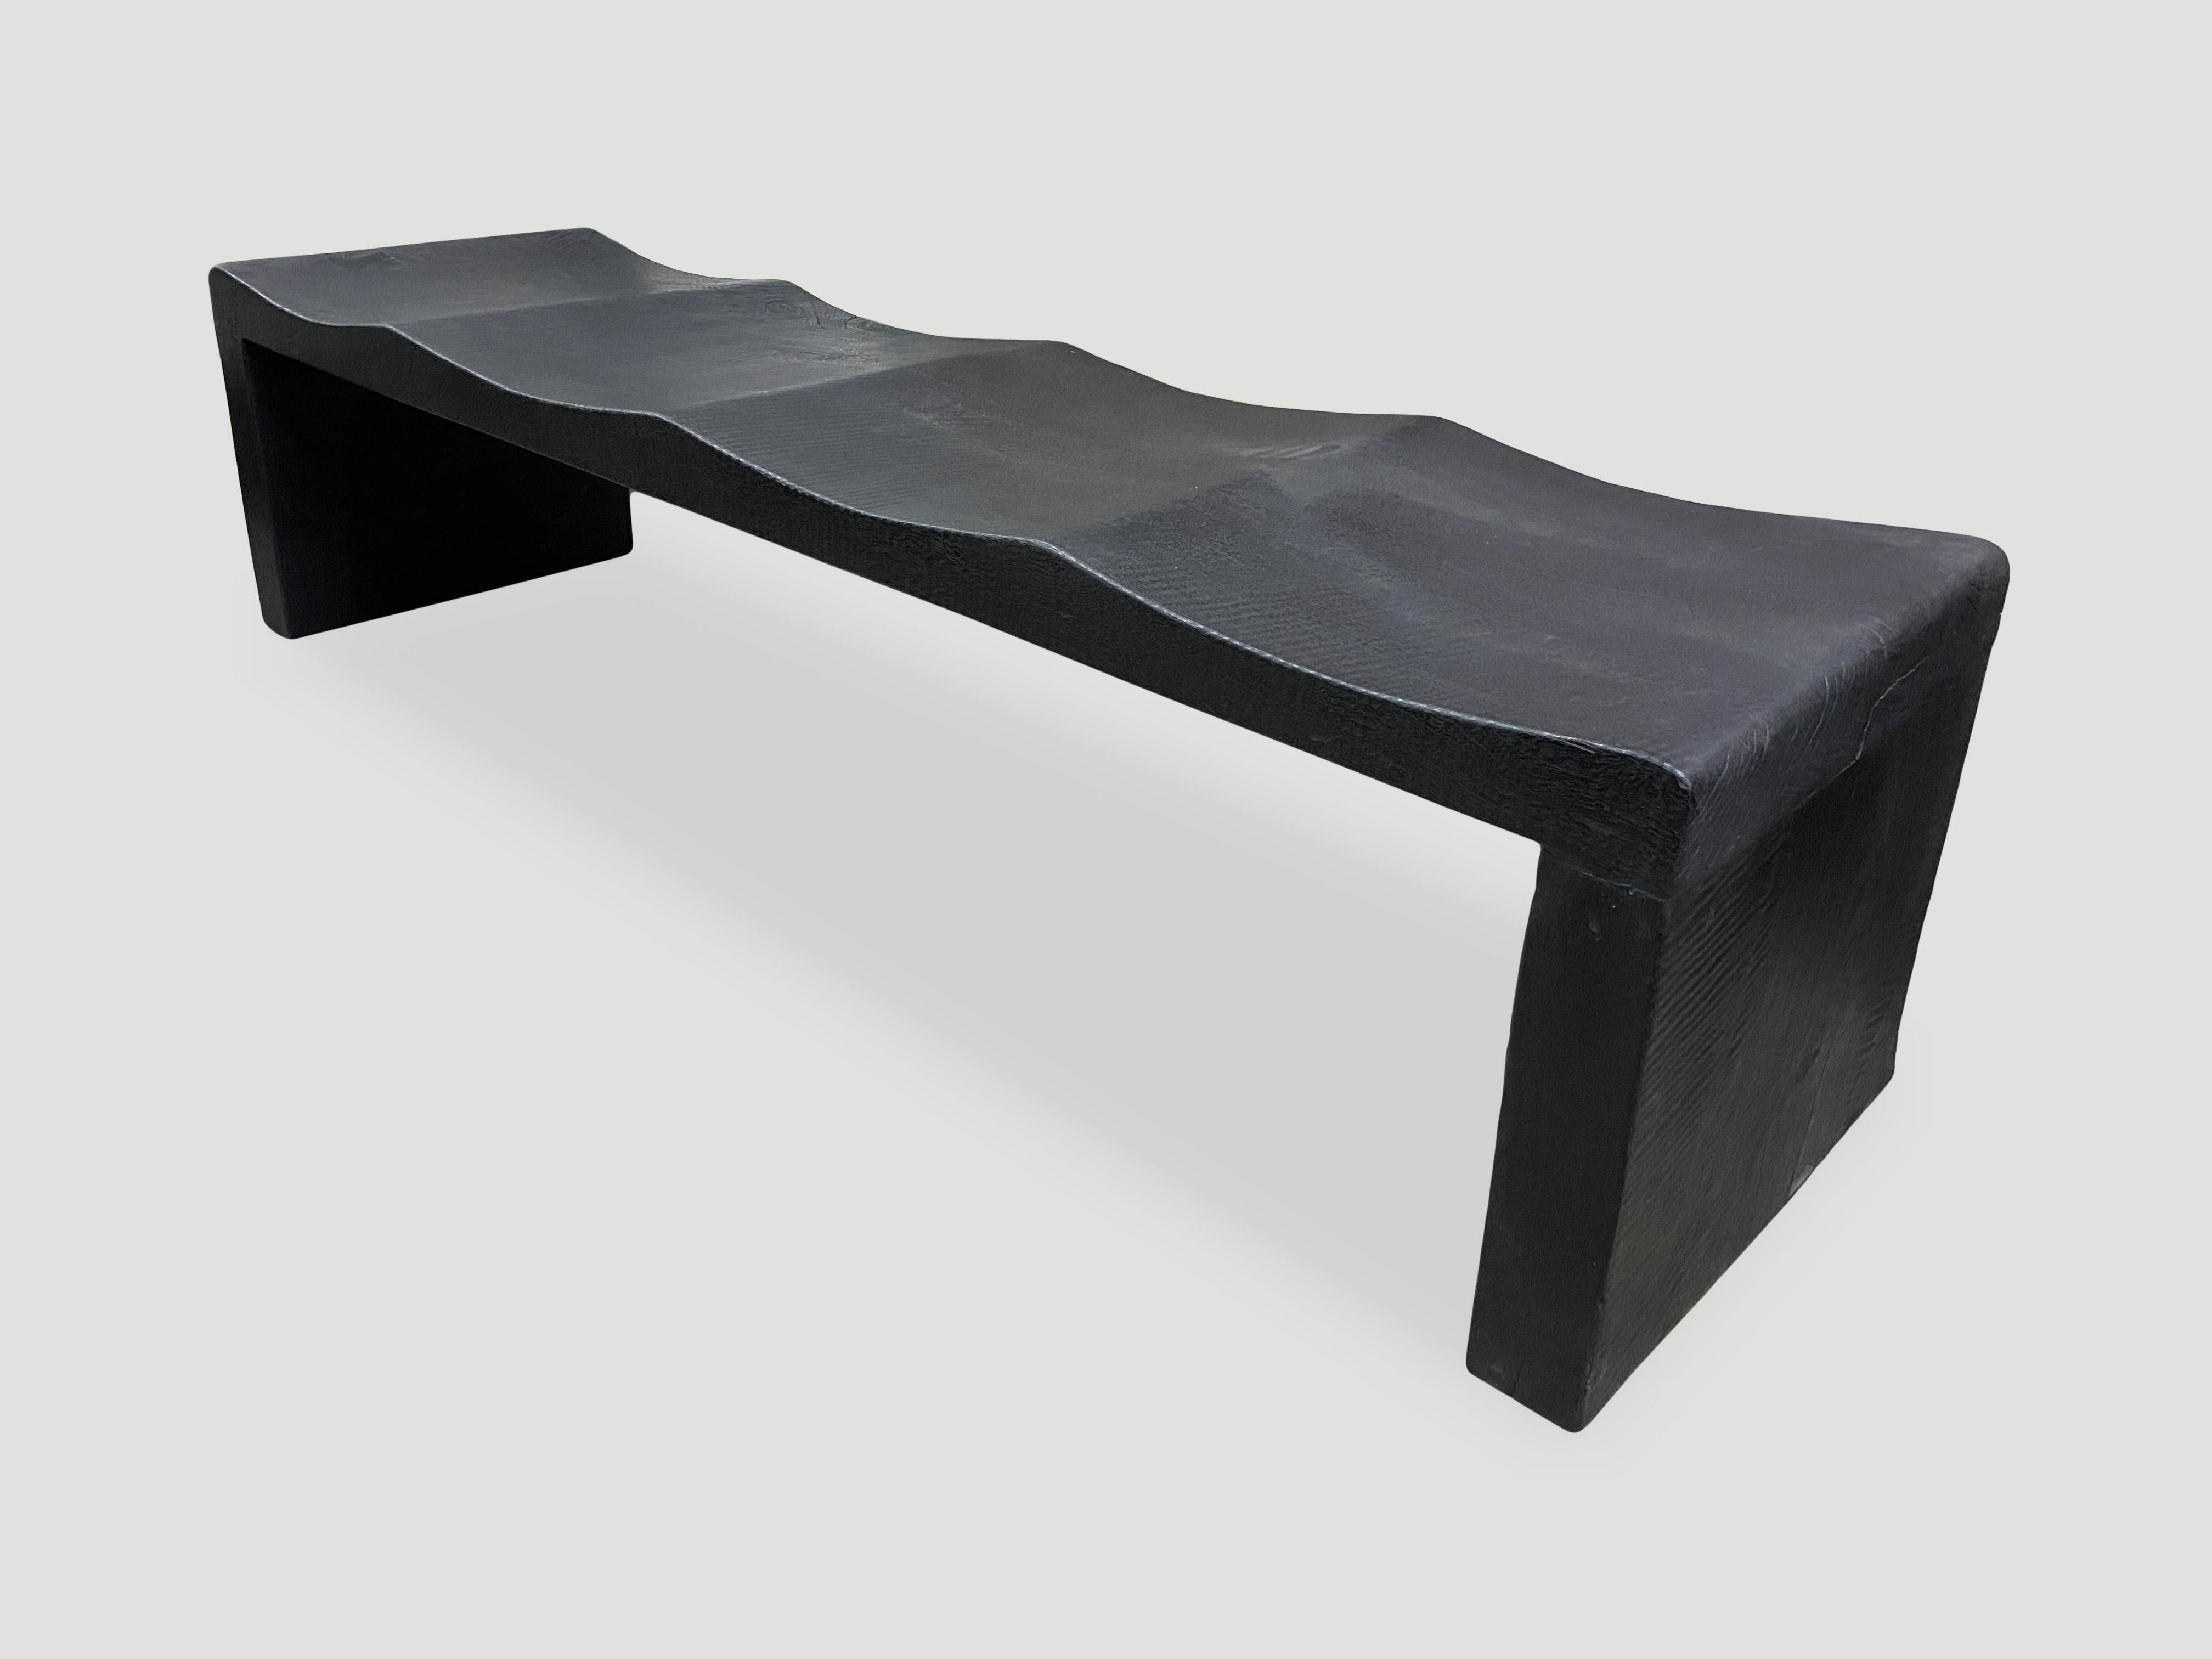 The wave bench represents a sleek, modern aesthetic, designed to provide comfort and durability. Solid reclaimed mango wood is hand carved from a single thick slab into a wave design with added butterfly detail. Burnt, sanded and sealed revealing